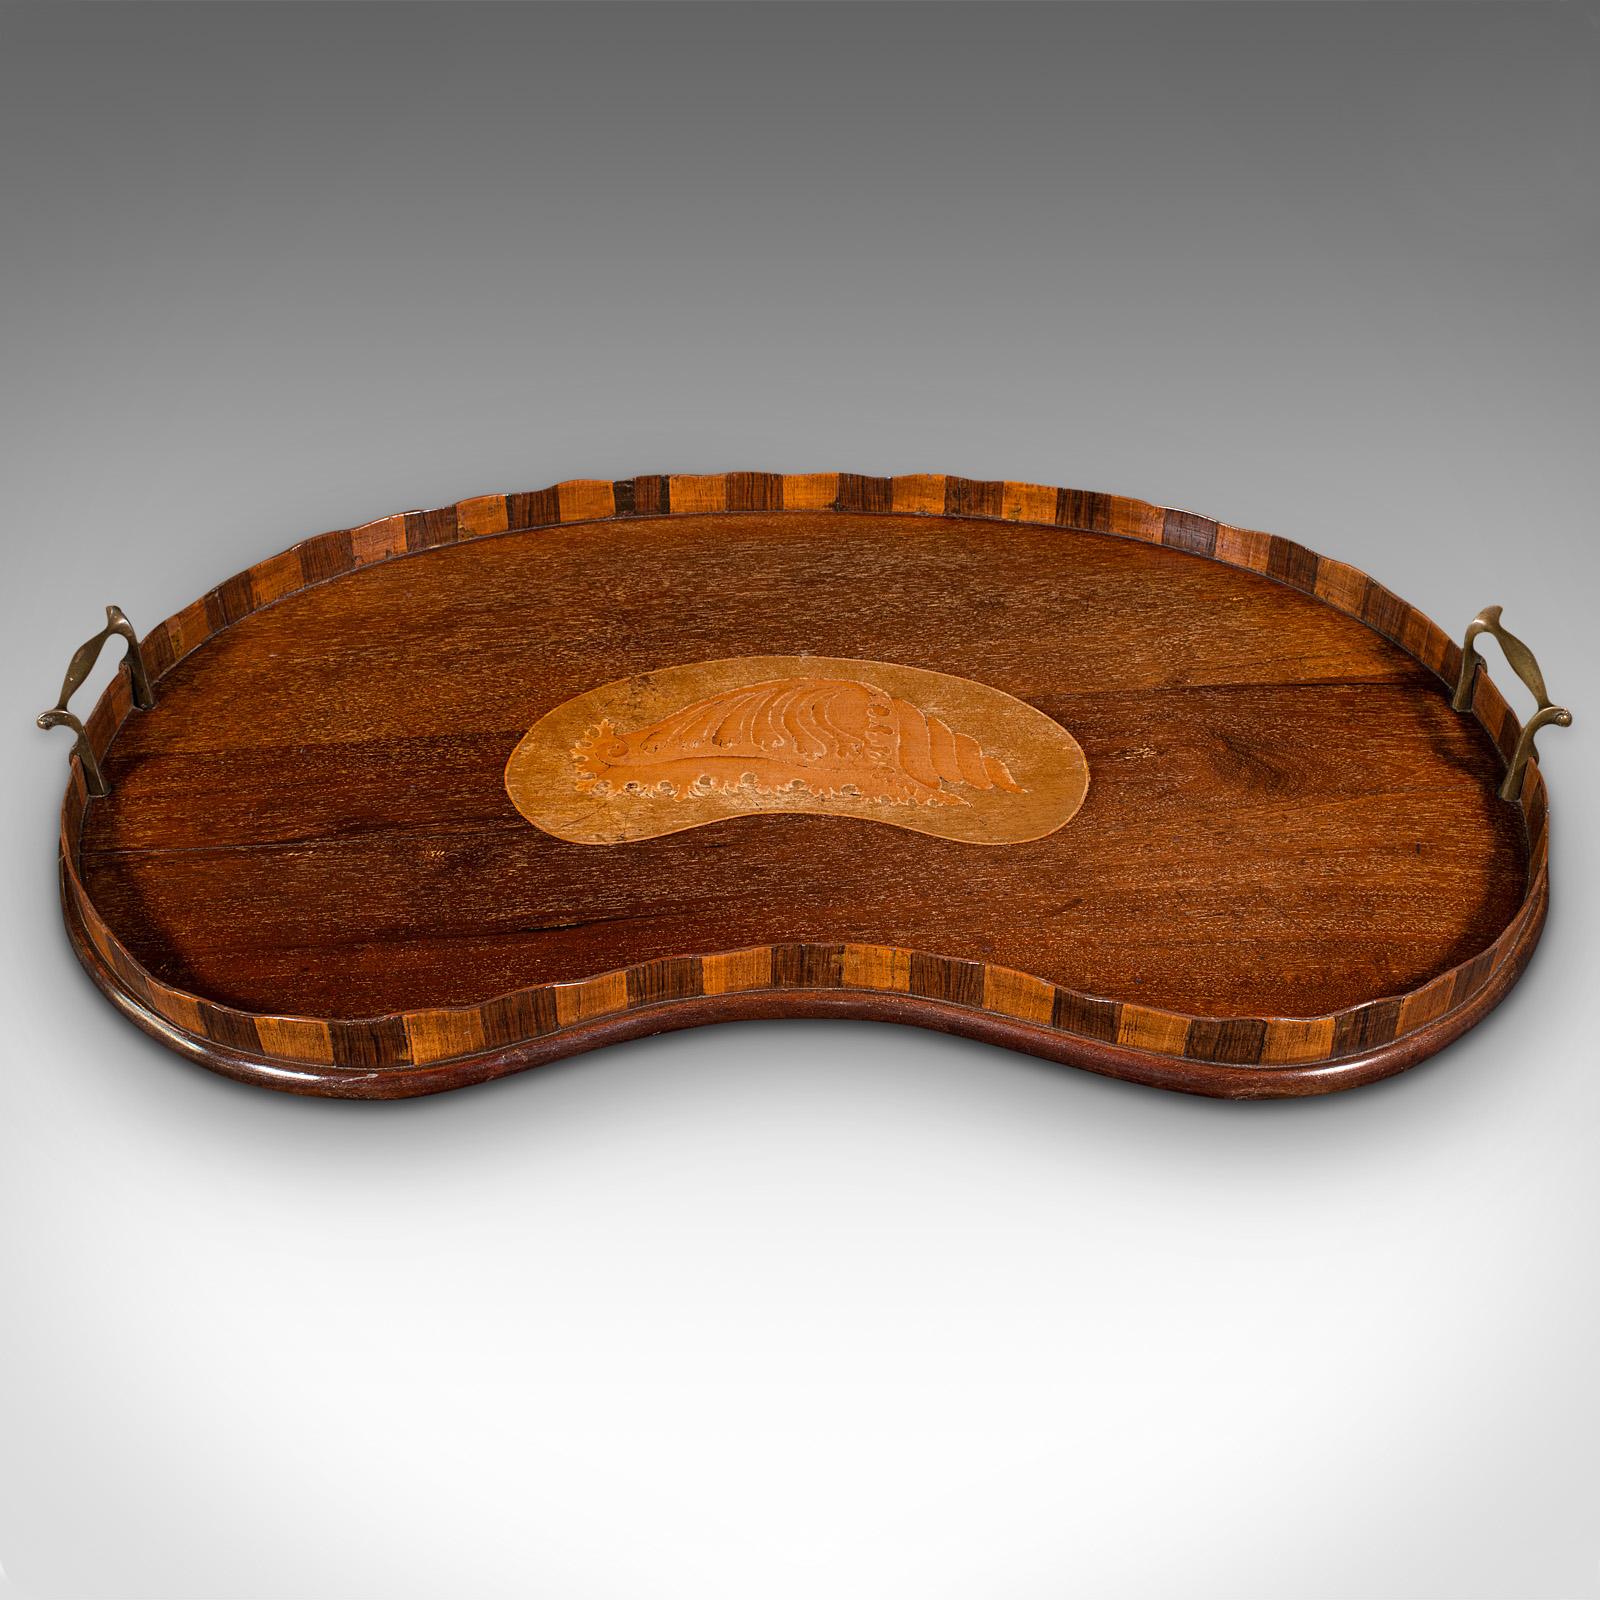 This is an antique butler's serving tray. An English, mahogany and walnut afternoon tea platter with boxwood inlay, dating to the Regency period, circa 1820.

Fascinating kidney shaped tray with delightful quality and appearance.
Displays a